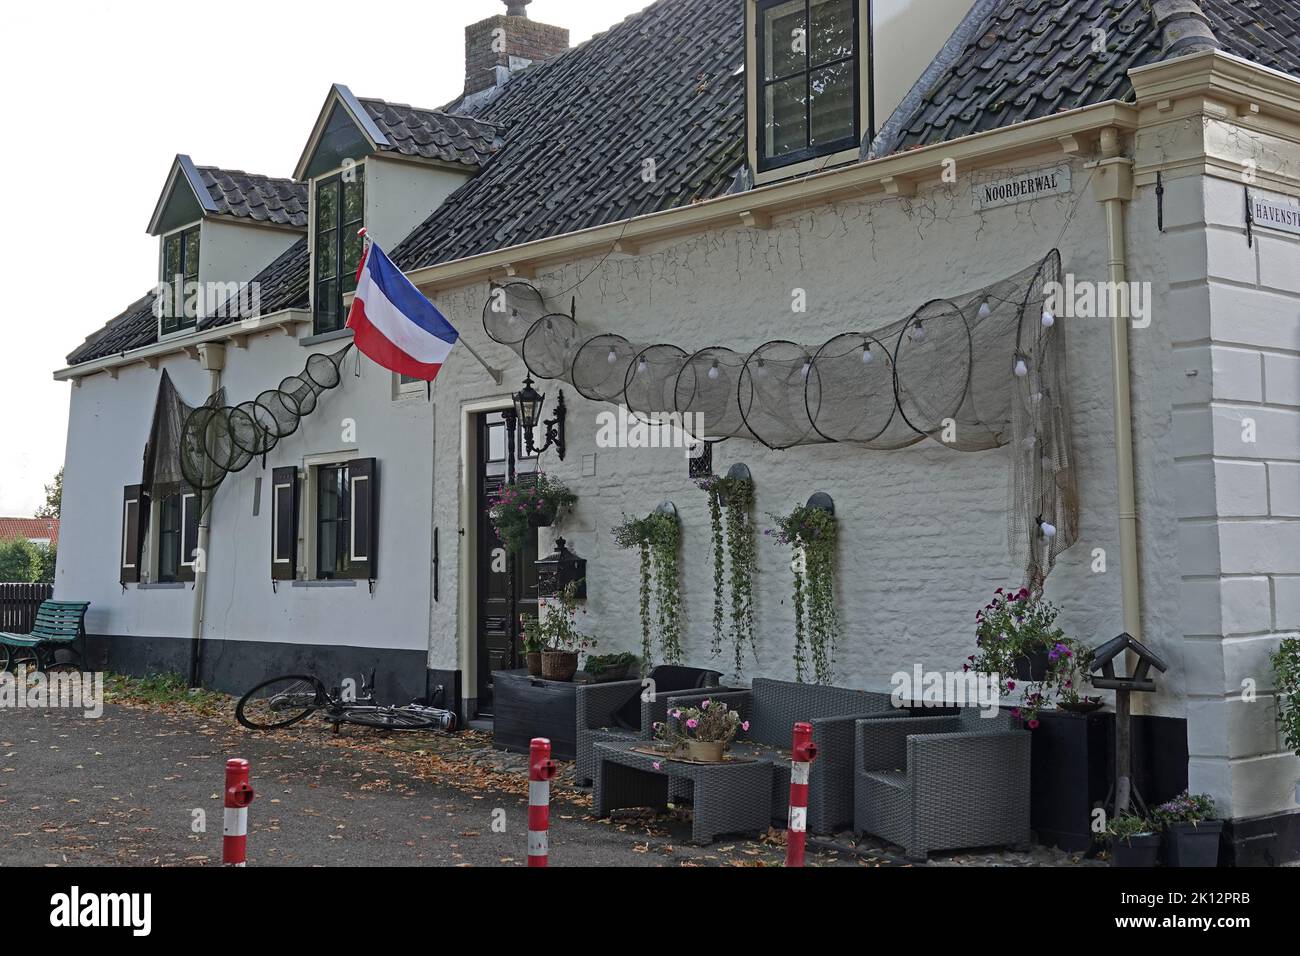 Elburg, the Netherlands - Sept. 9 2022 Historical old fisherman's house from the 19th century. It has a tiled roof black door and ... Stock Photo